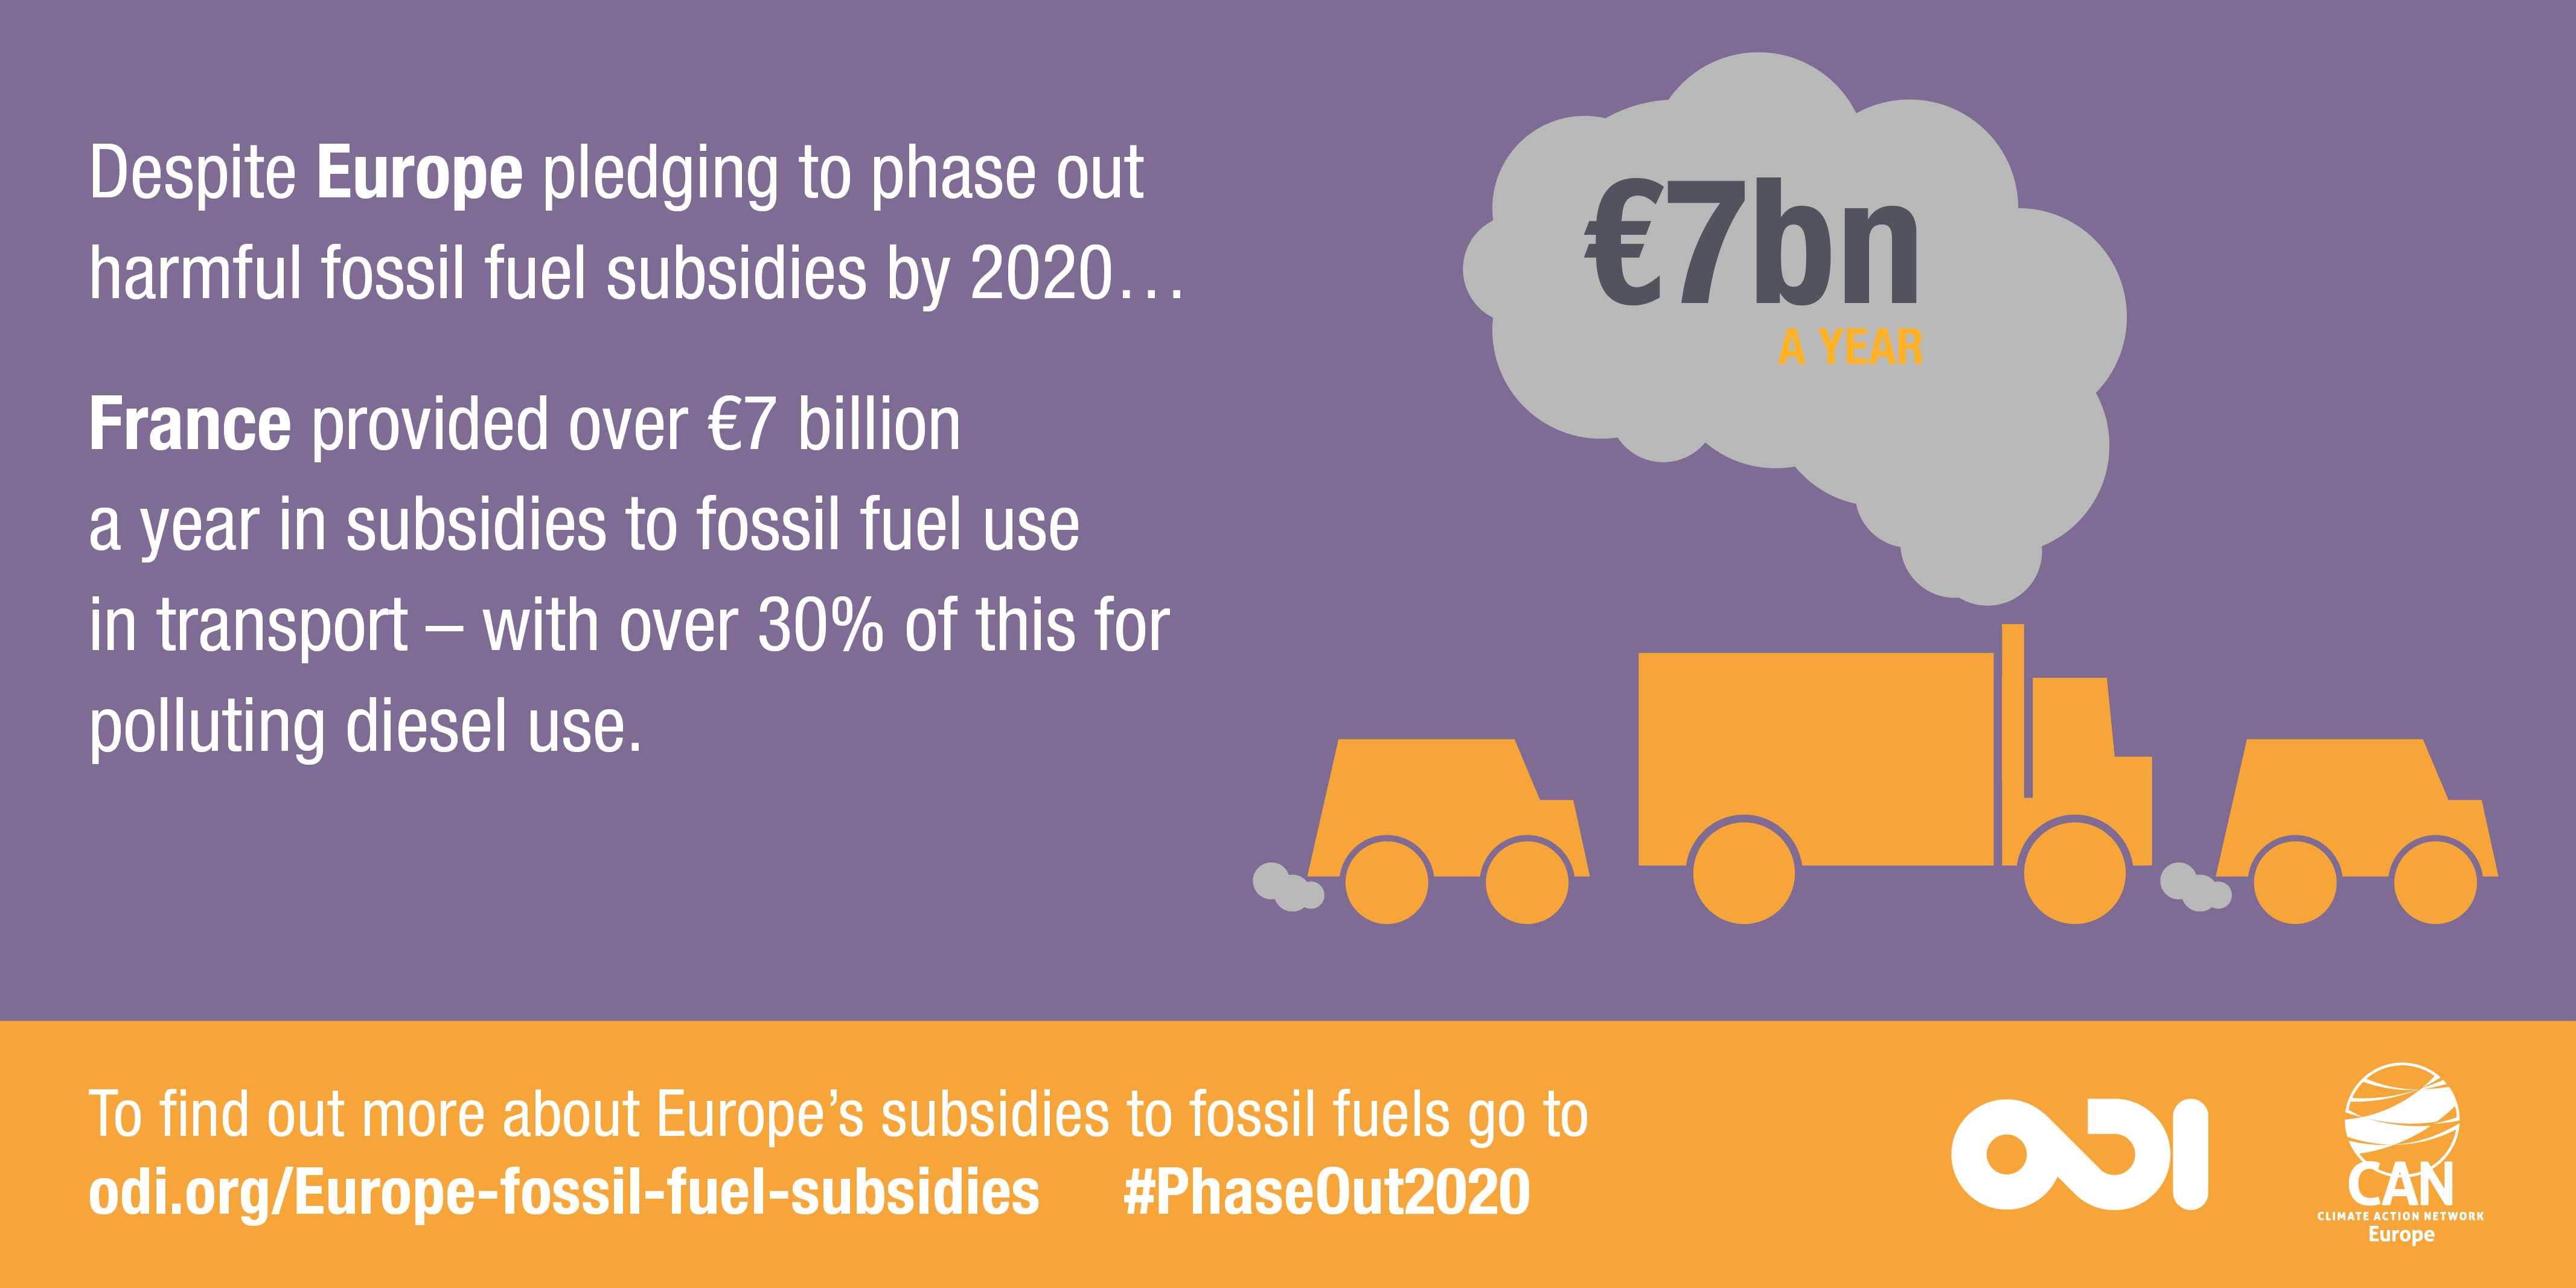 Infographic: France provided over €7 billion a year in subsidies to fossil fuel use in transport - with over 30% of this for polluting diesel use. ODI 